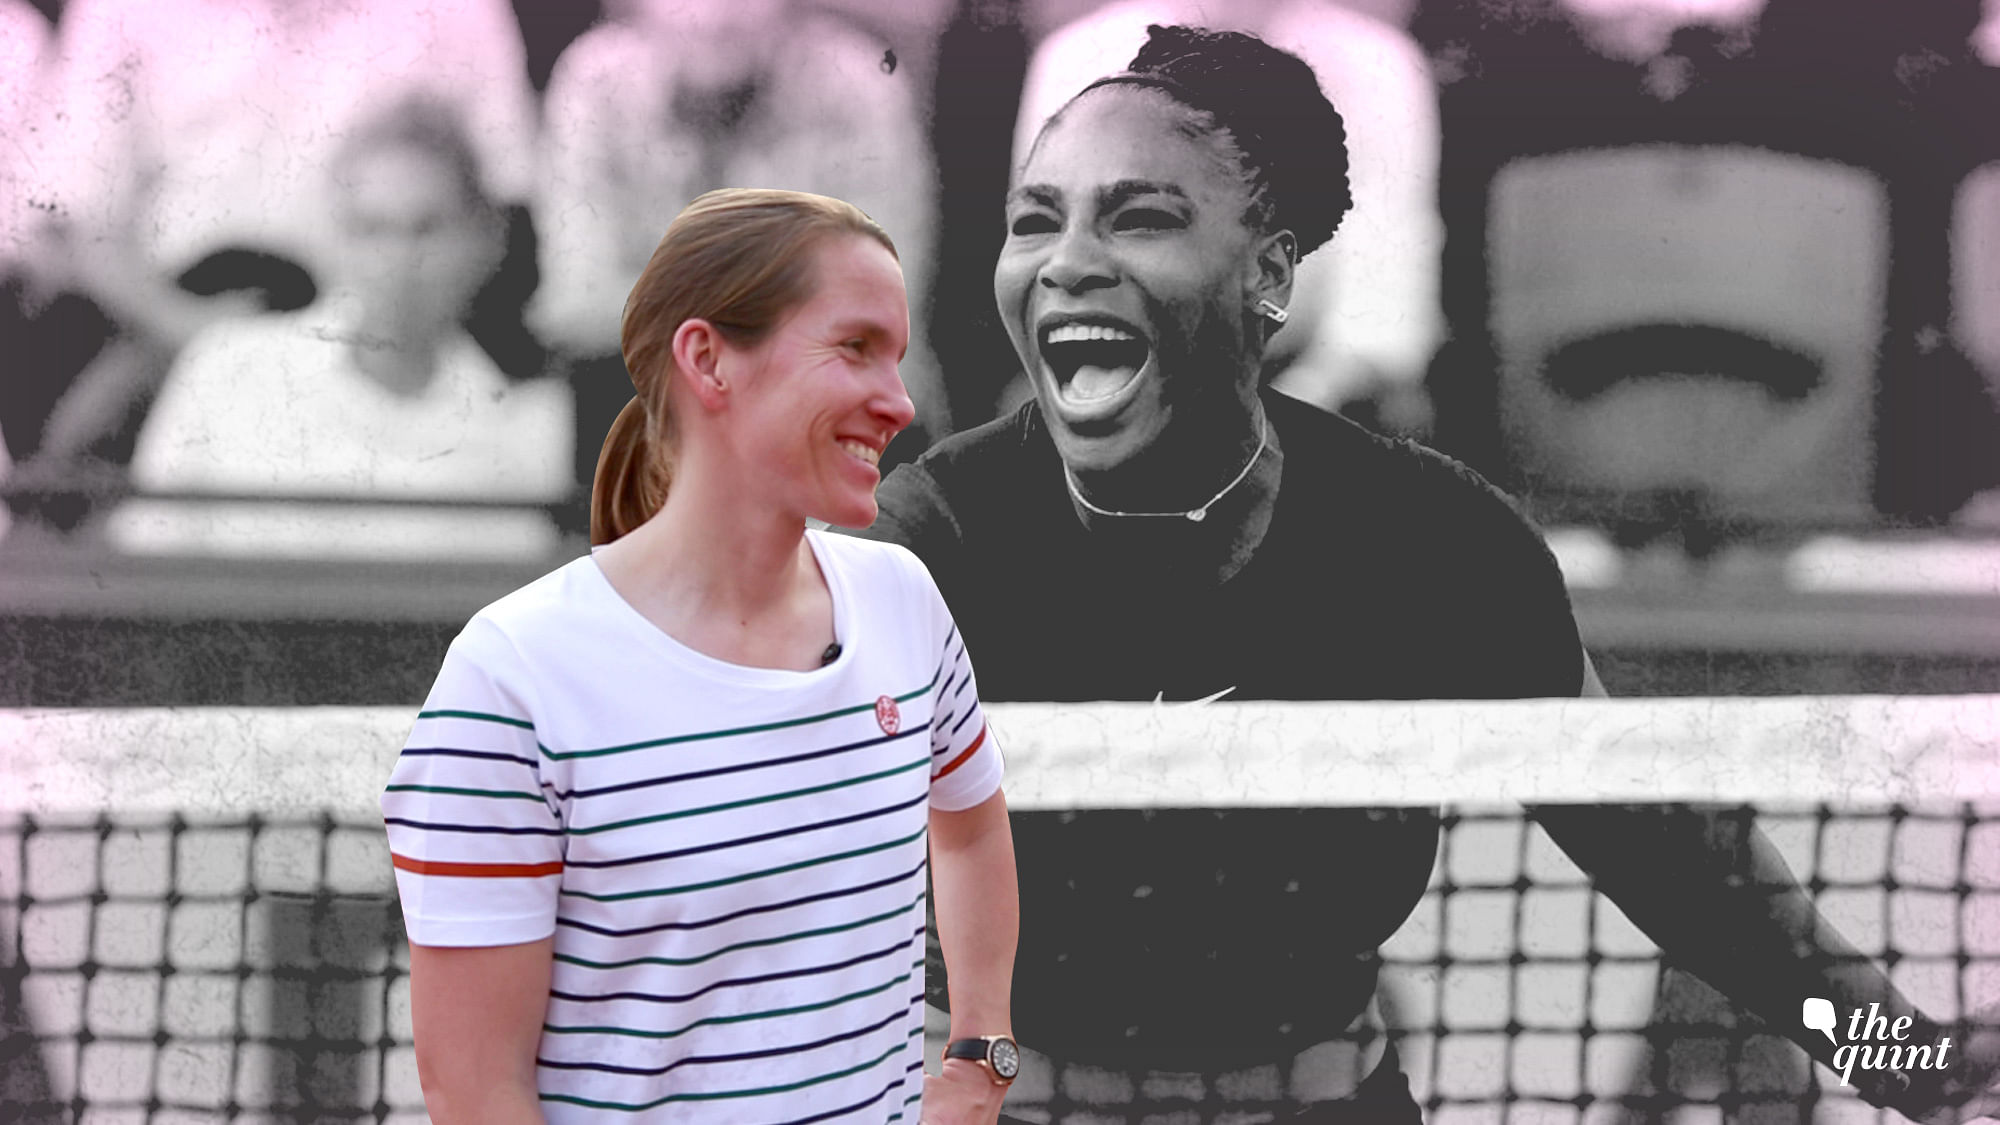 Justine Henin speaks about Serena Williams and what makes her successful still.